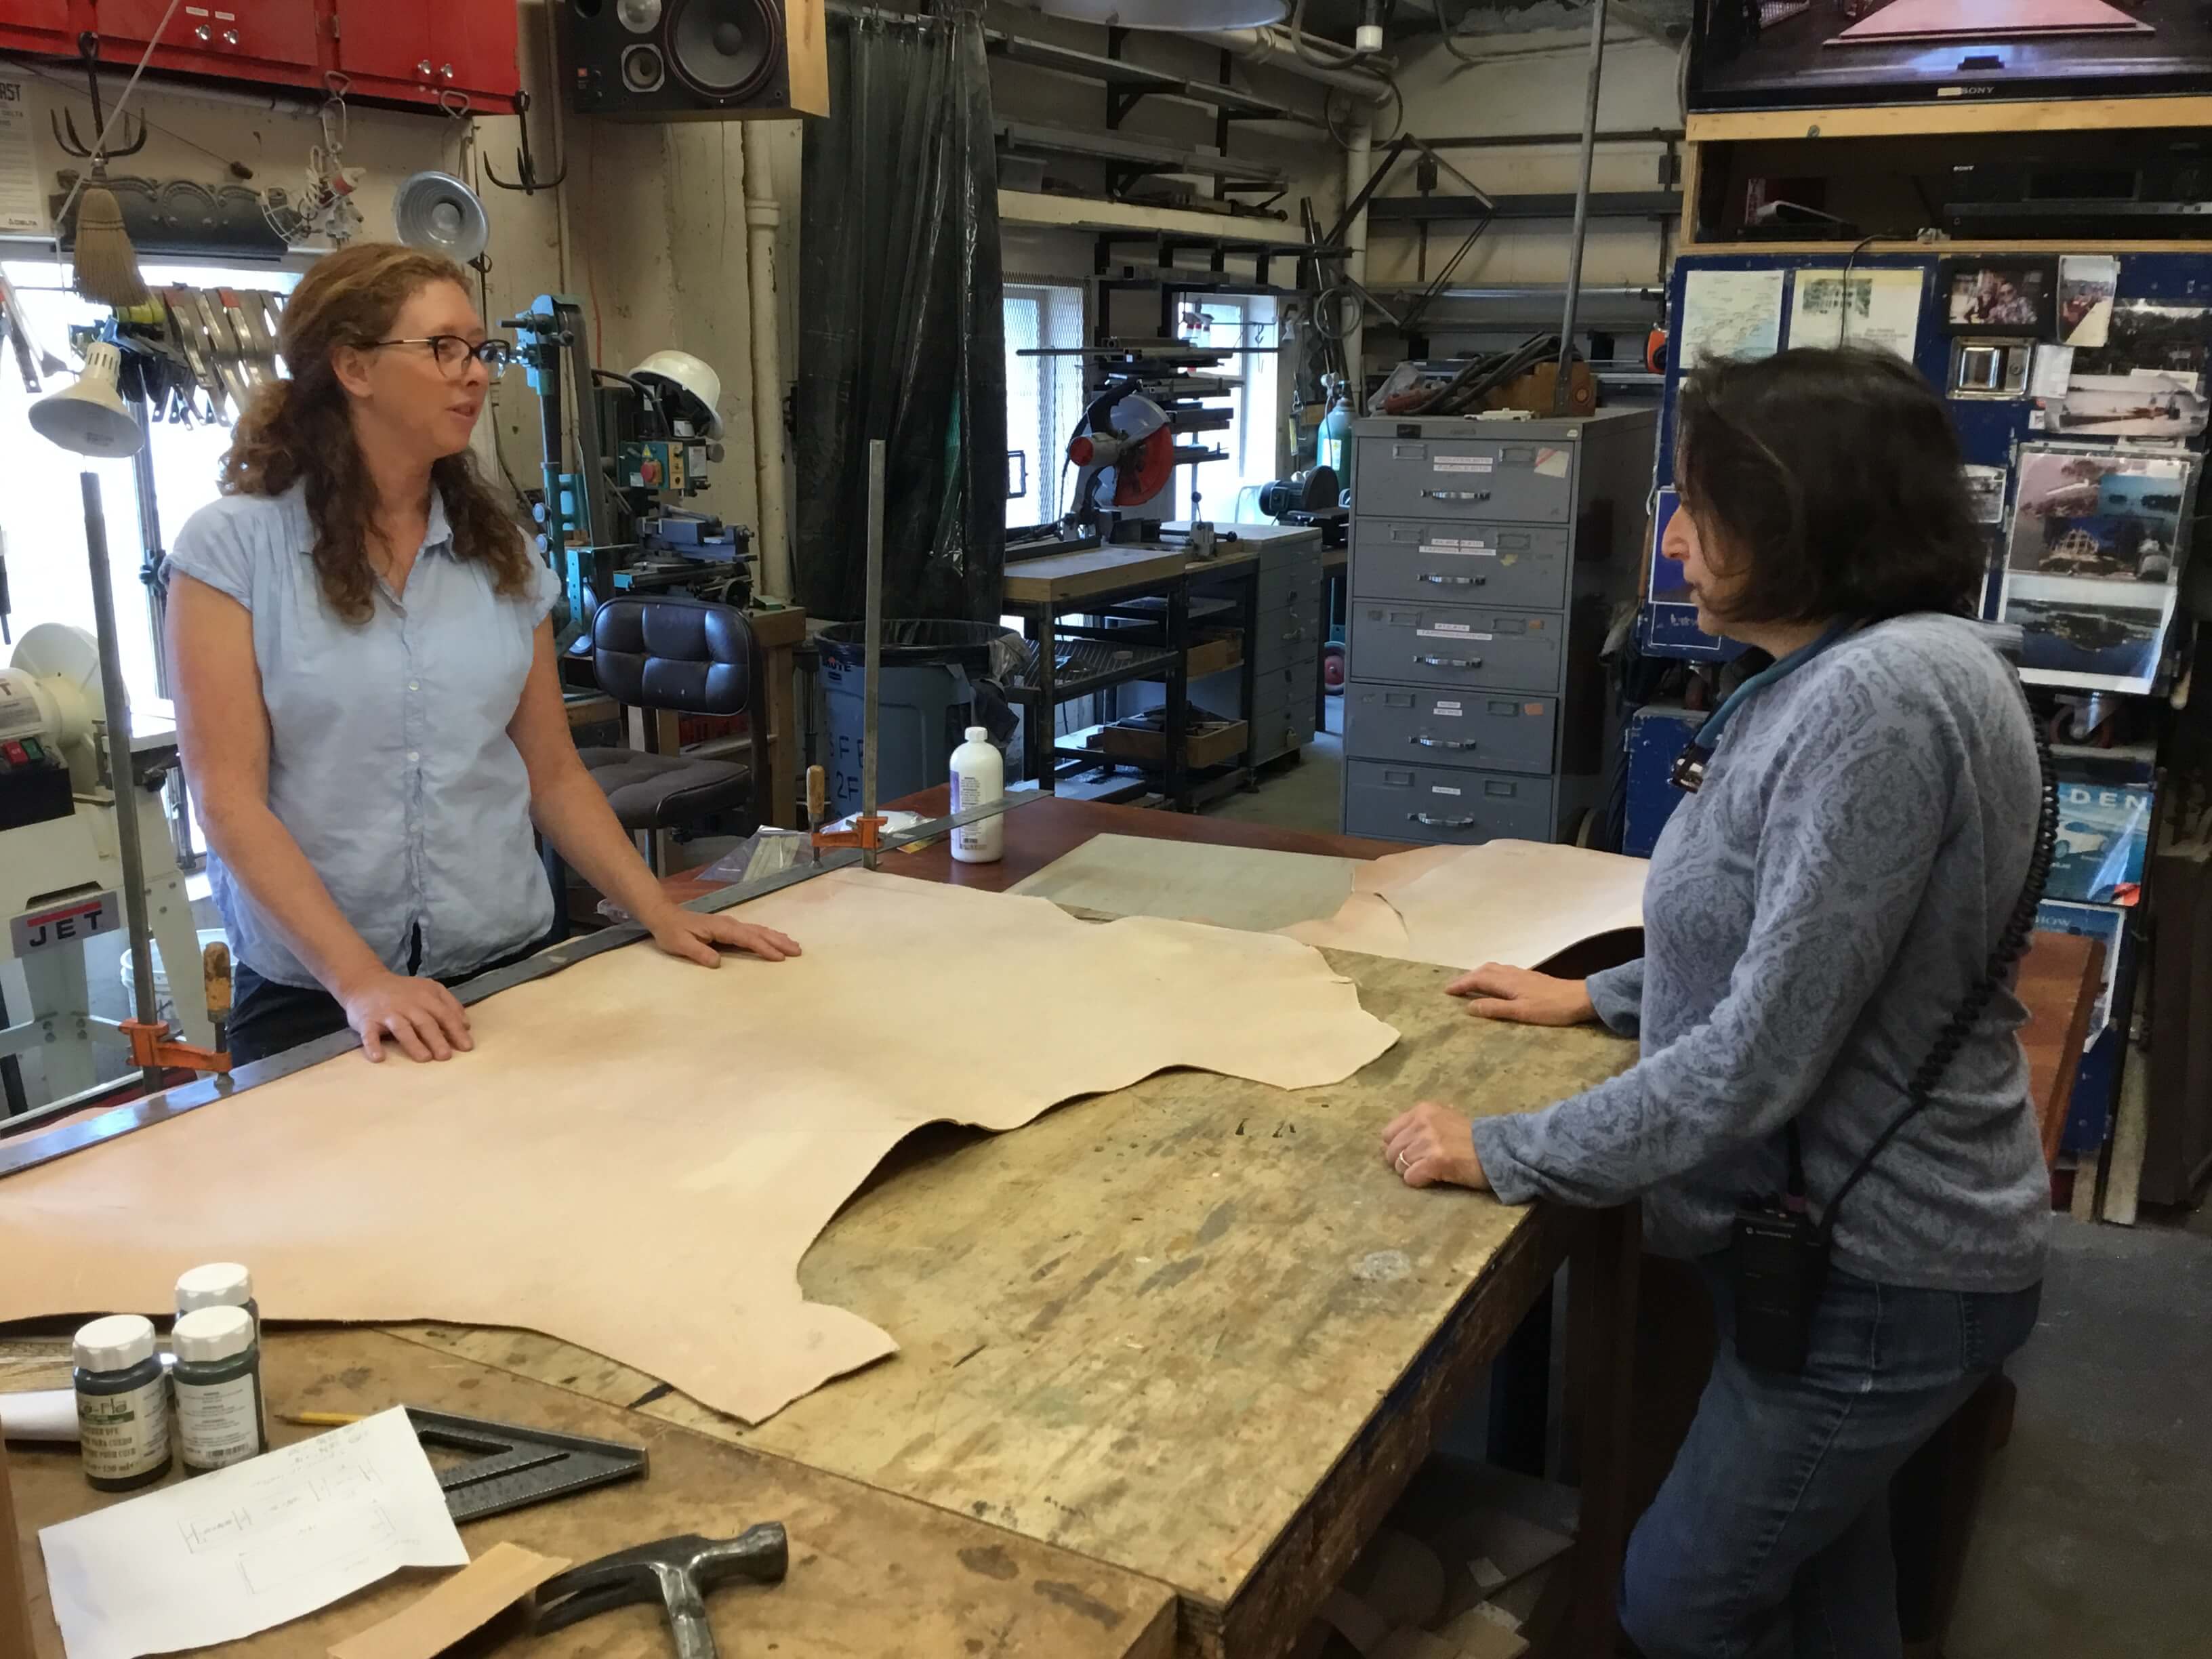 Sarah Shores, in conversation with Properties Master, Lori Harrison, talking about the leather before it is cut for Scarpia’s desk (and the to-be-worked-on desk).